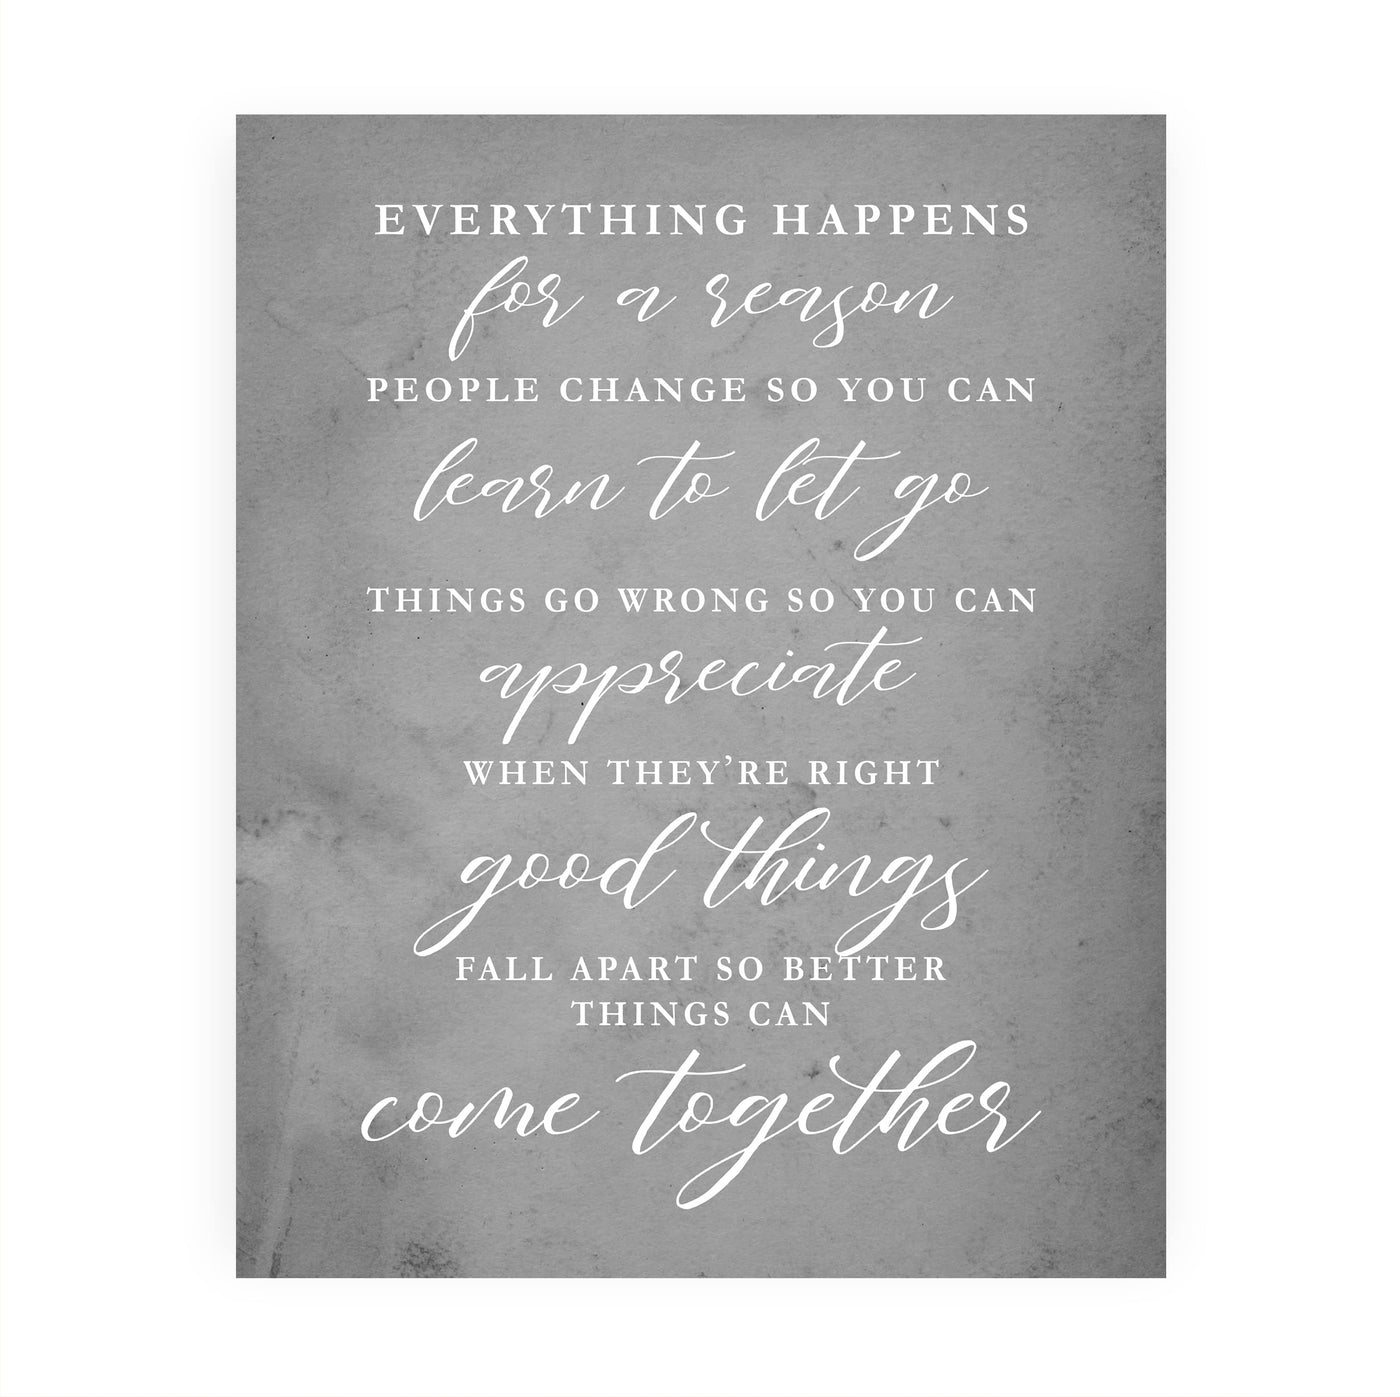 "Everything Happens For a Reason" Inspirational Quotes Wall Decor -8x10" Motivational Art Print-Ready to Frame. Modern Farmhouse Decoration for Home-Office-Classroom Sign. Great Gift!